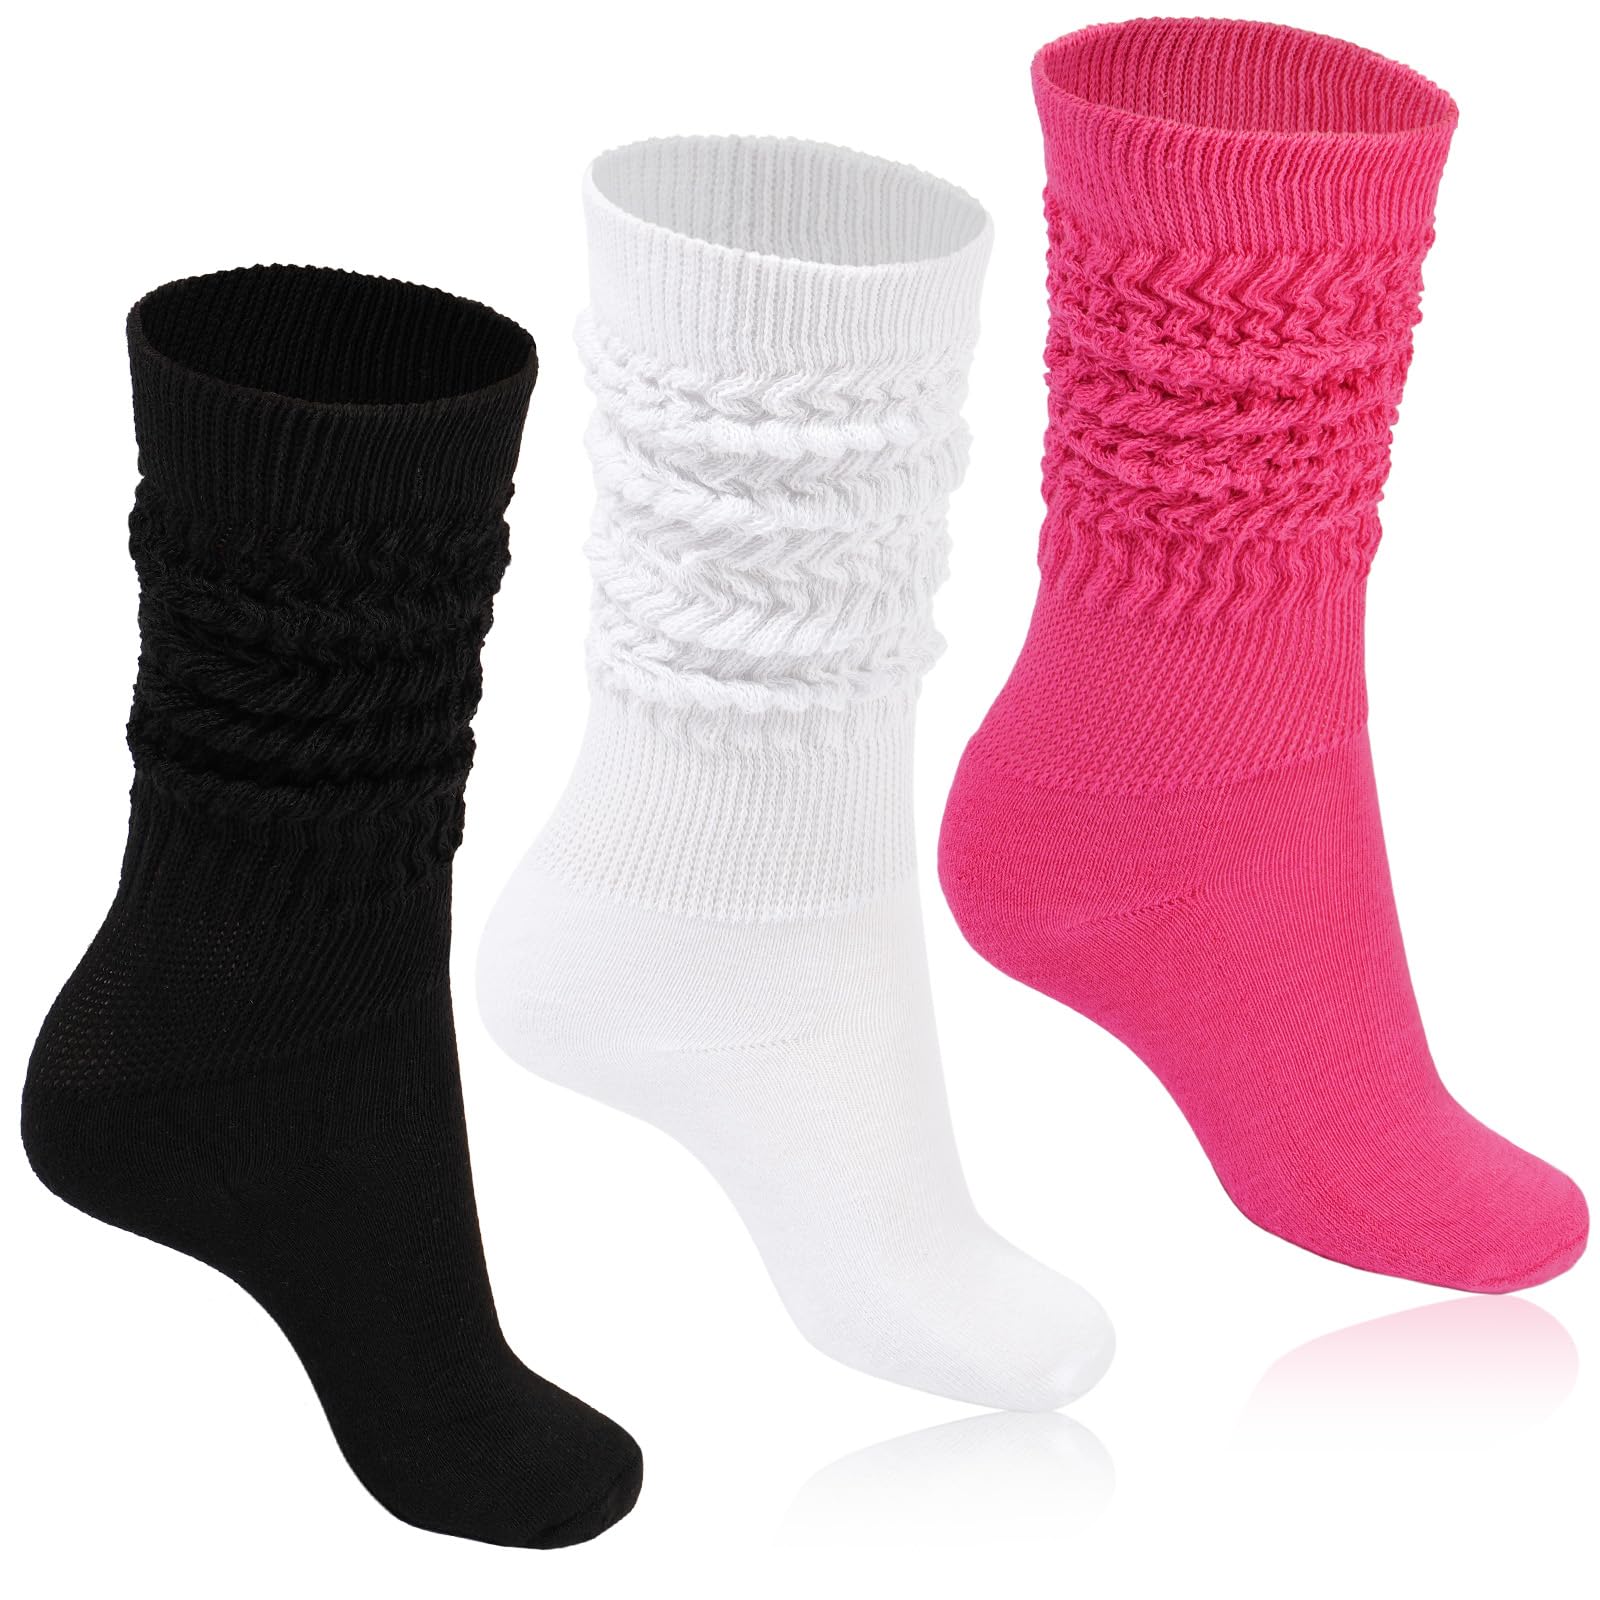 3 Pairs Cotton Knee High Slouch Socks - Black, White, Rose - Moon Wood